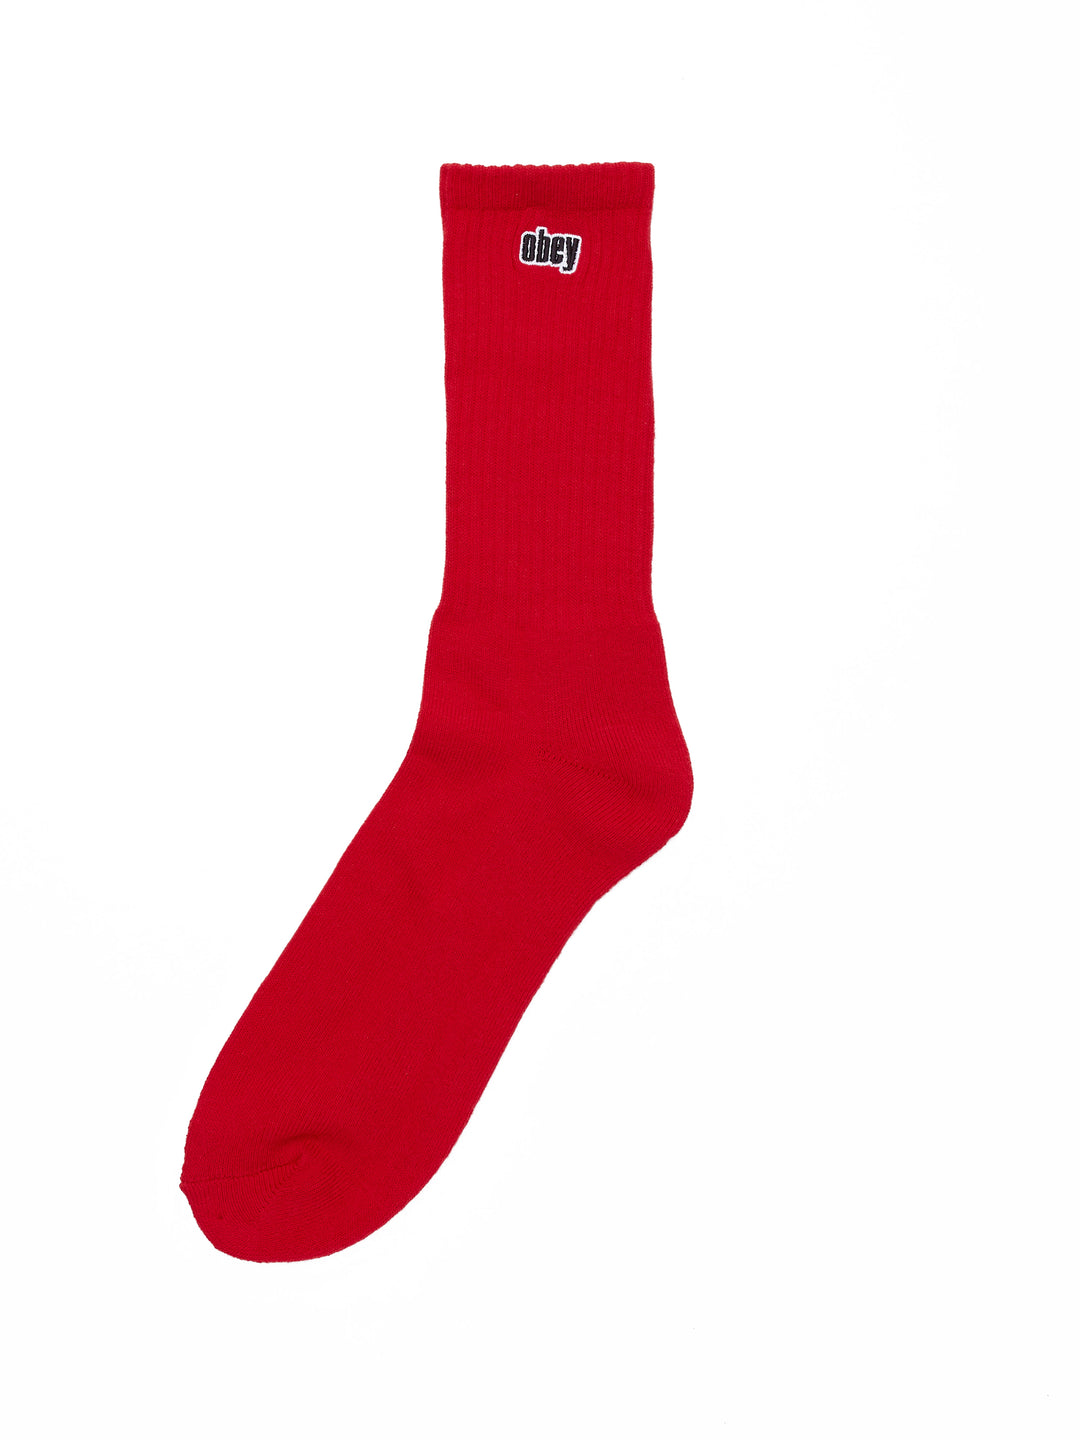 New Times Socks II | Scarlet Red - Main Image Number 1 of 1